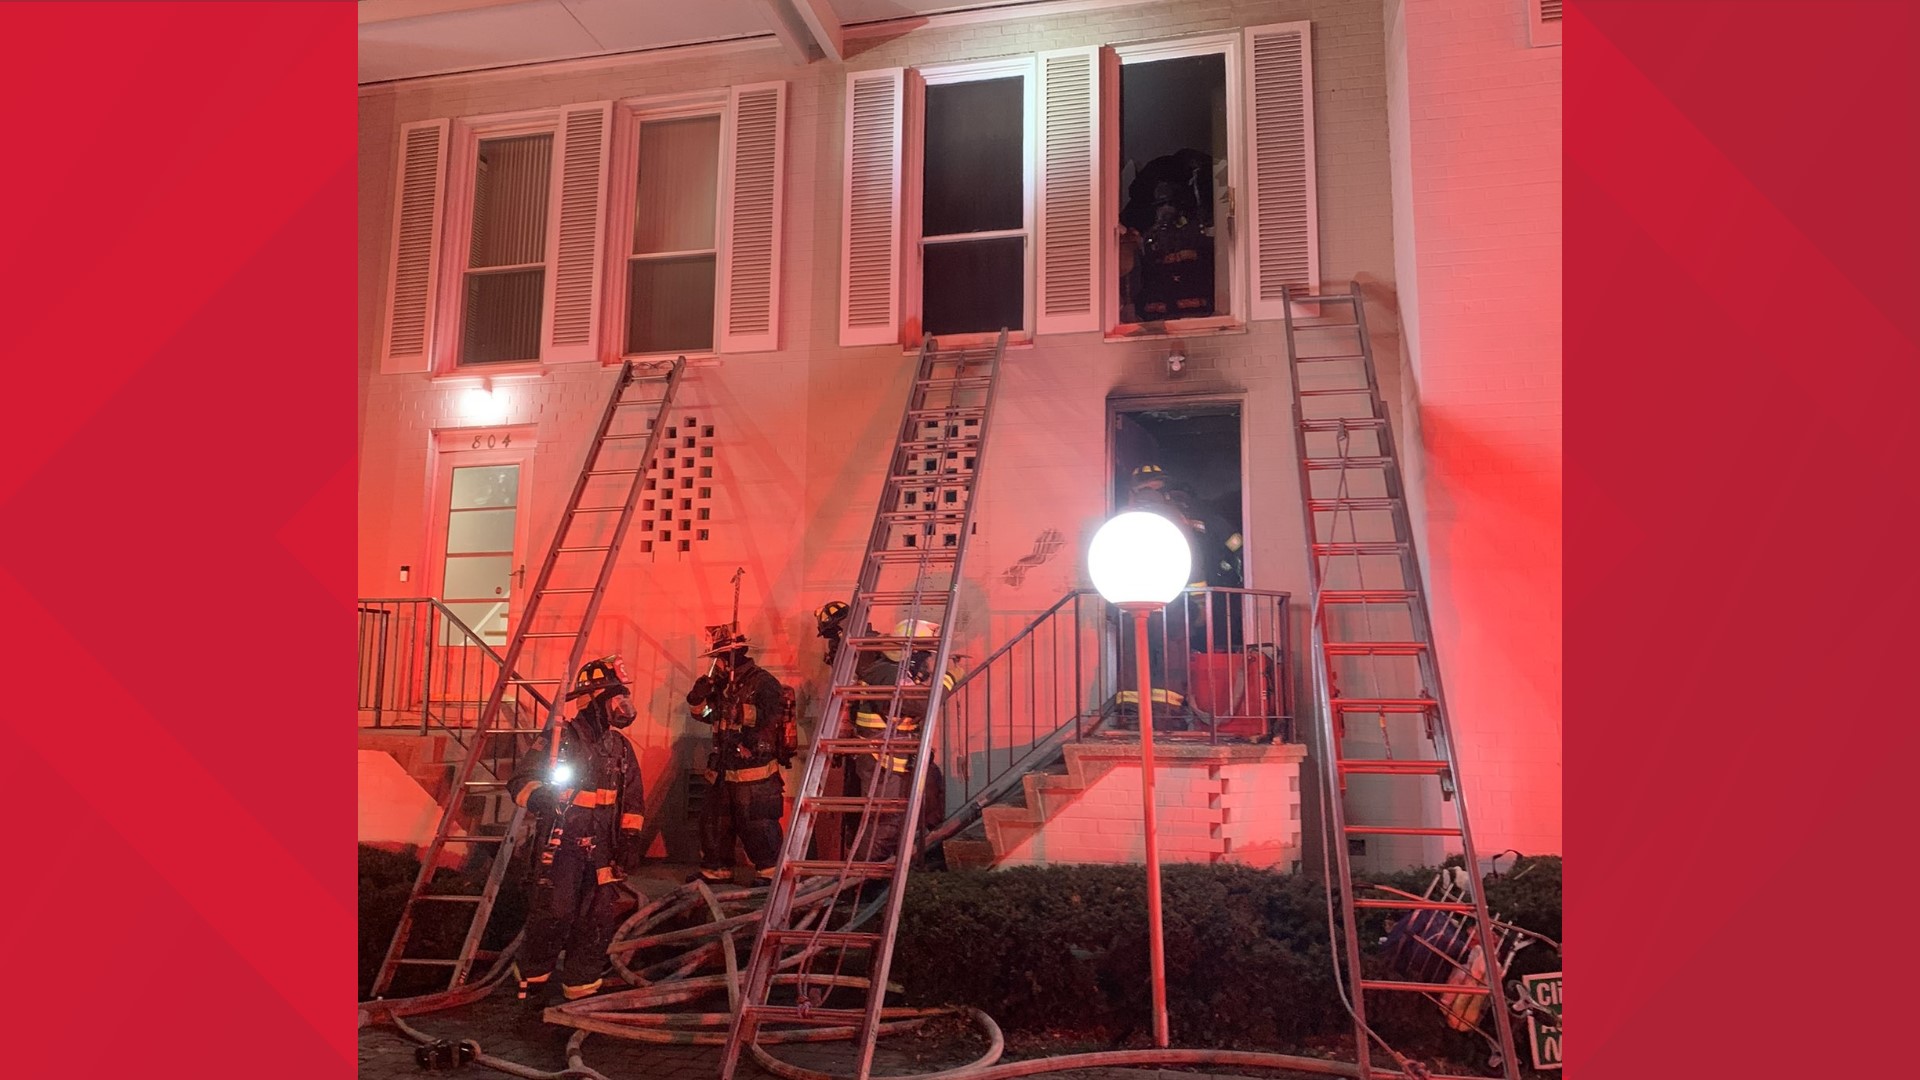 A fire in Southwest D.C. lead a woman and a firefighter to be transported to the hospital with non-life threatening injuries.